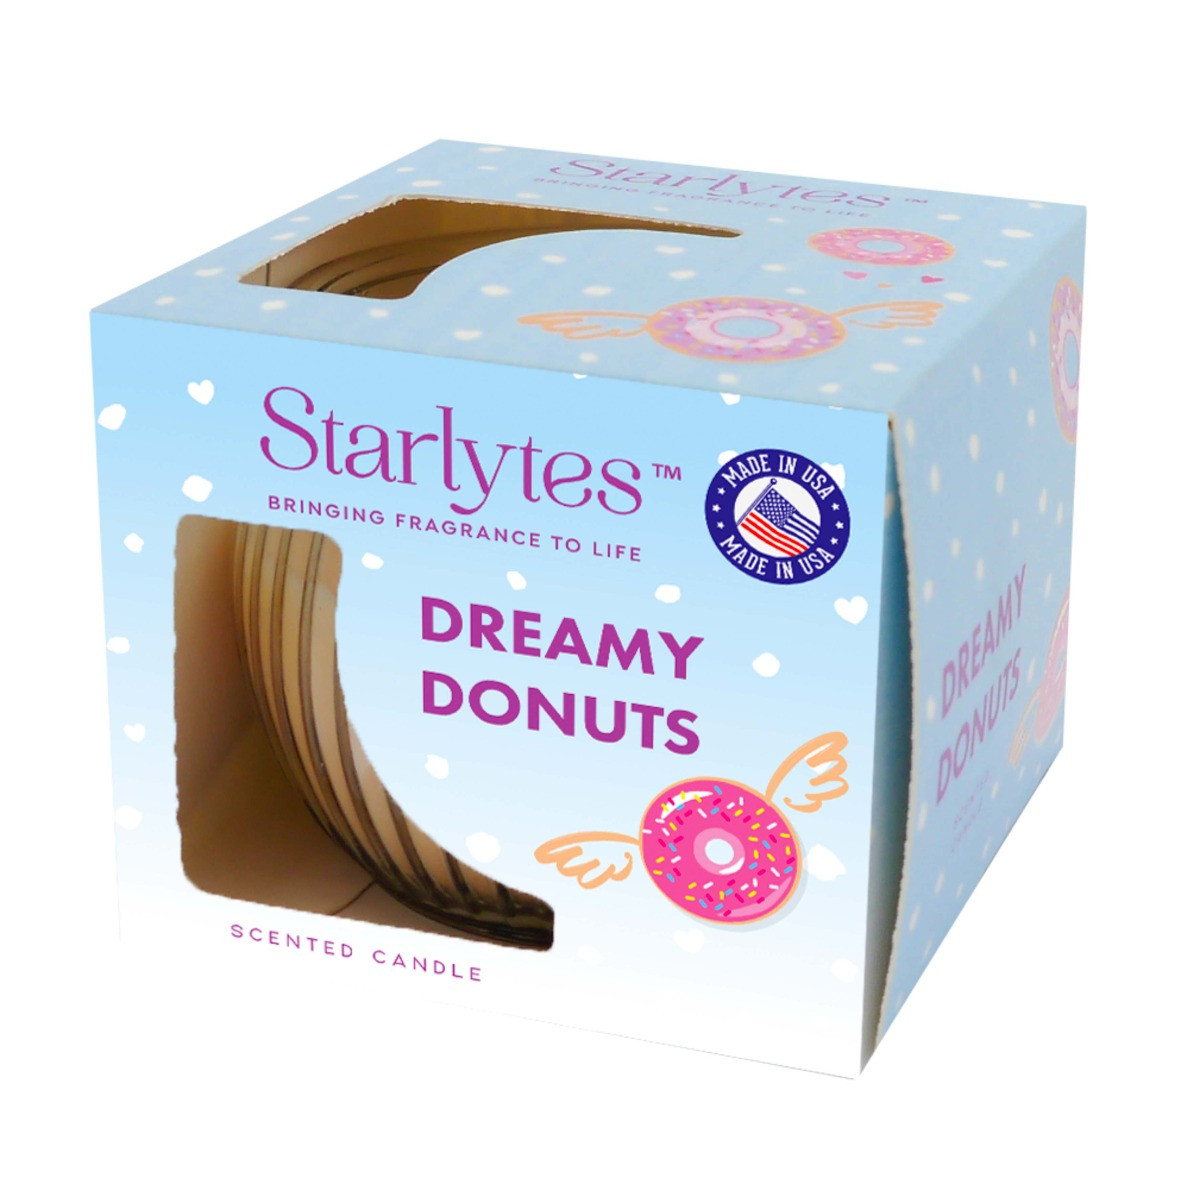 Starlytes Boxed Candle - Dreamy Donuts>